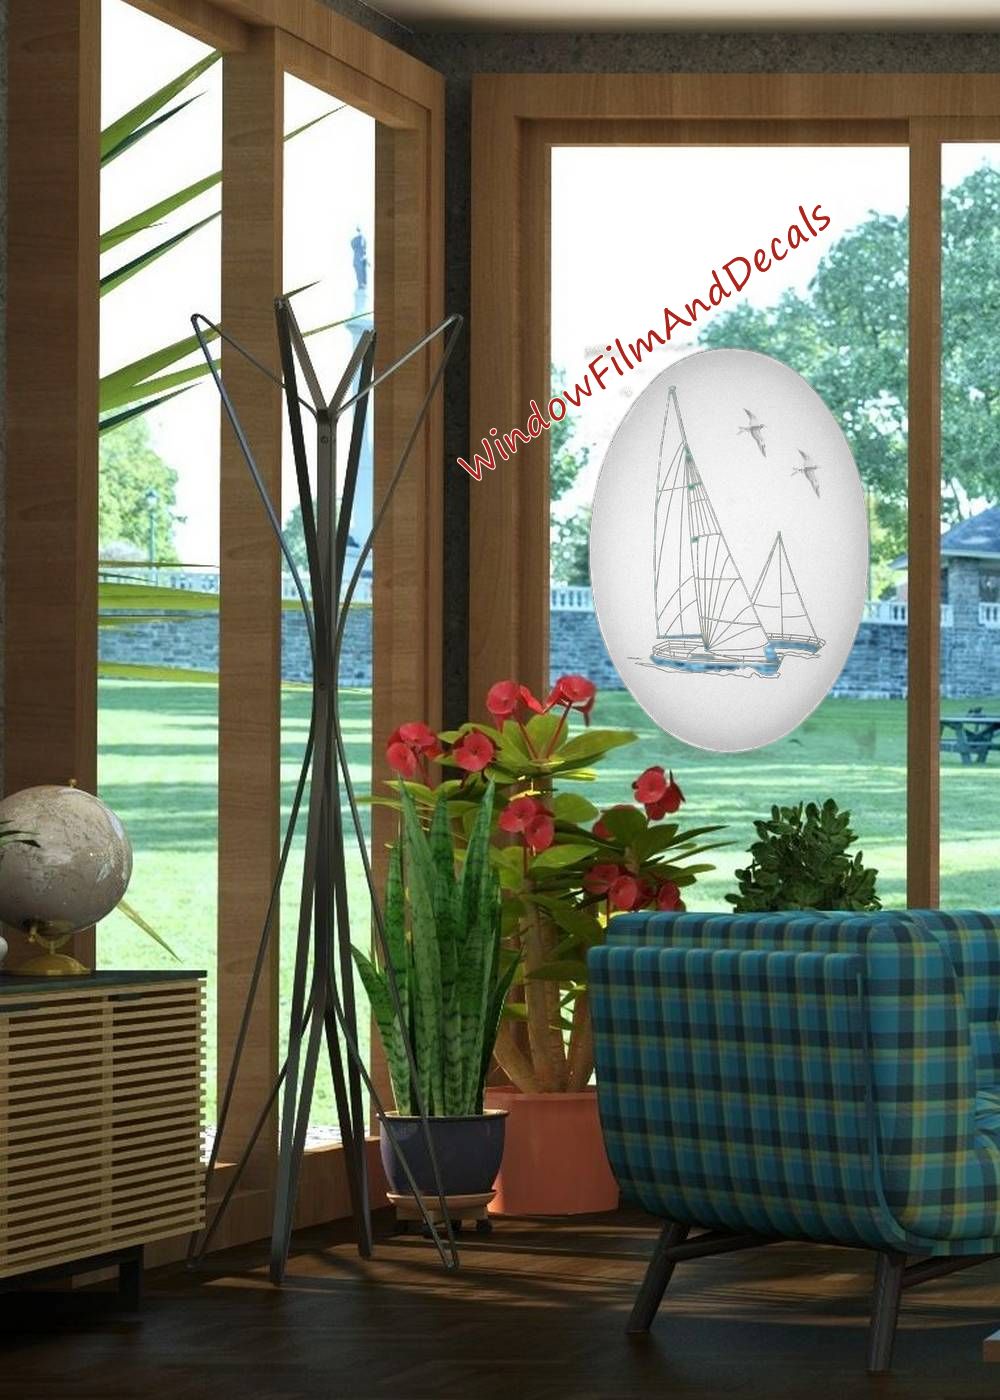 Sailboat Oval Static Cling Window Decal - White w/ Clear Design